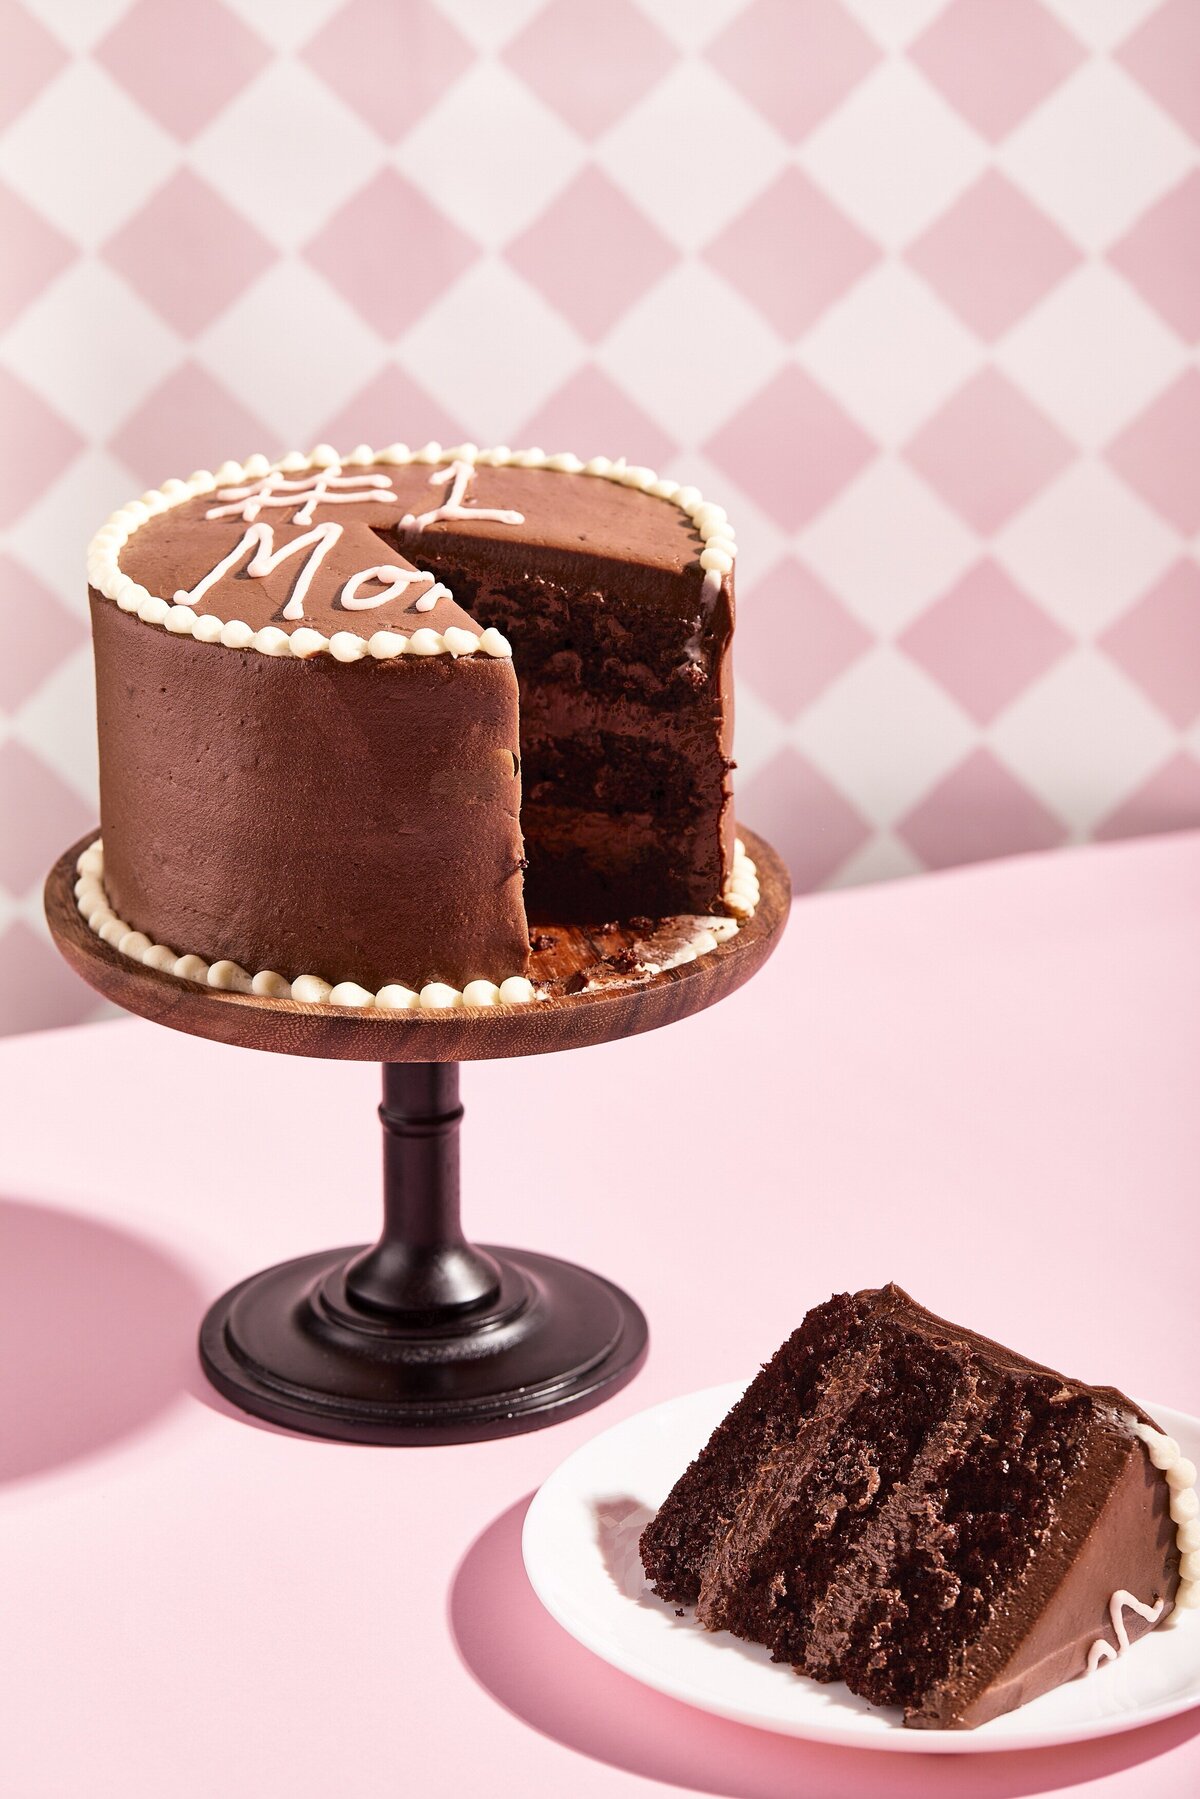 A chocolate cake on a stand with a single piece of cake cut out on a plate below it.